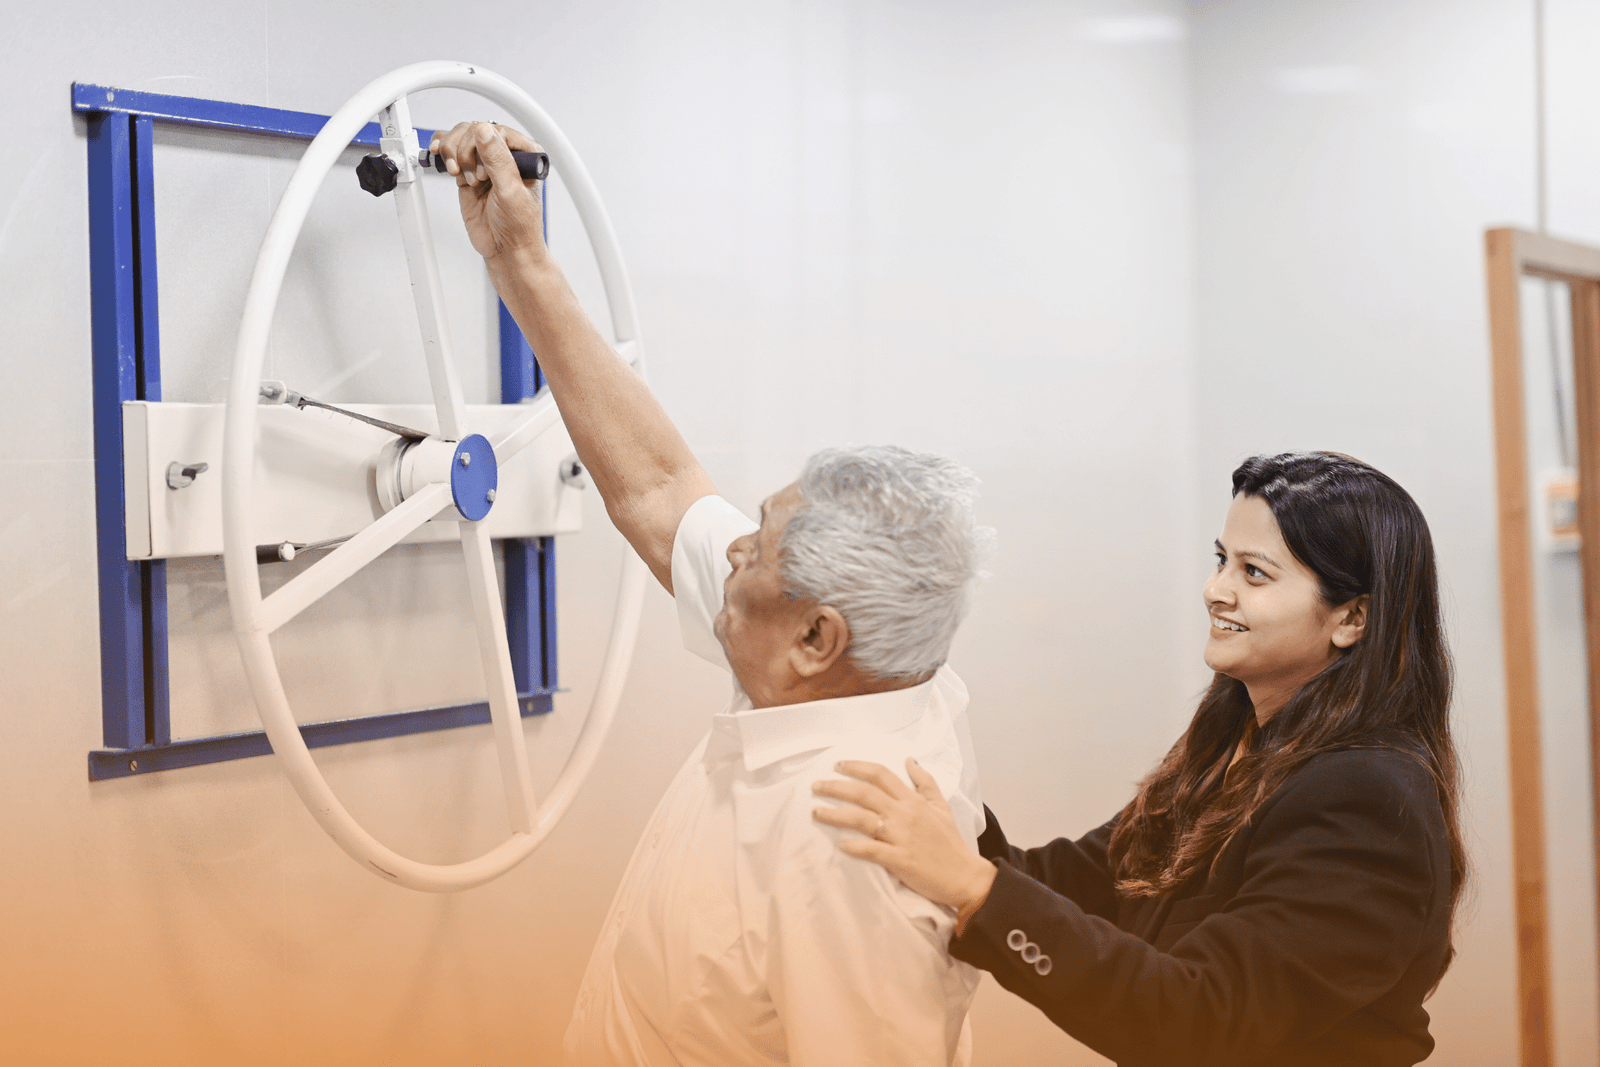 Ergophyx provides assistance in setting up and operating a fully equipped Work-Related Musculoskeletal Disorders Care Centre at your workplace.